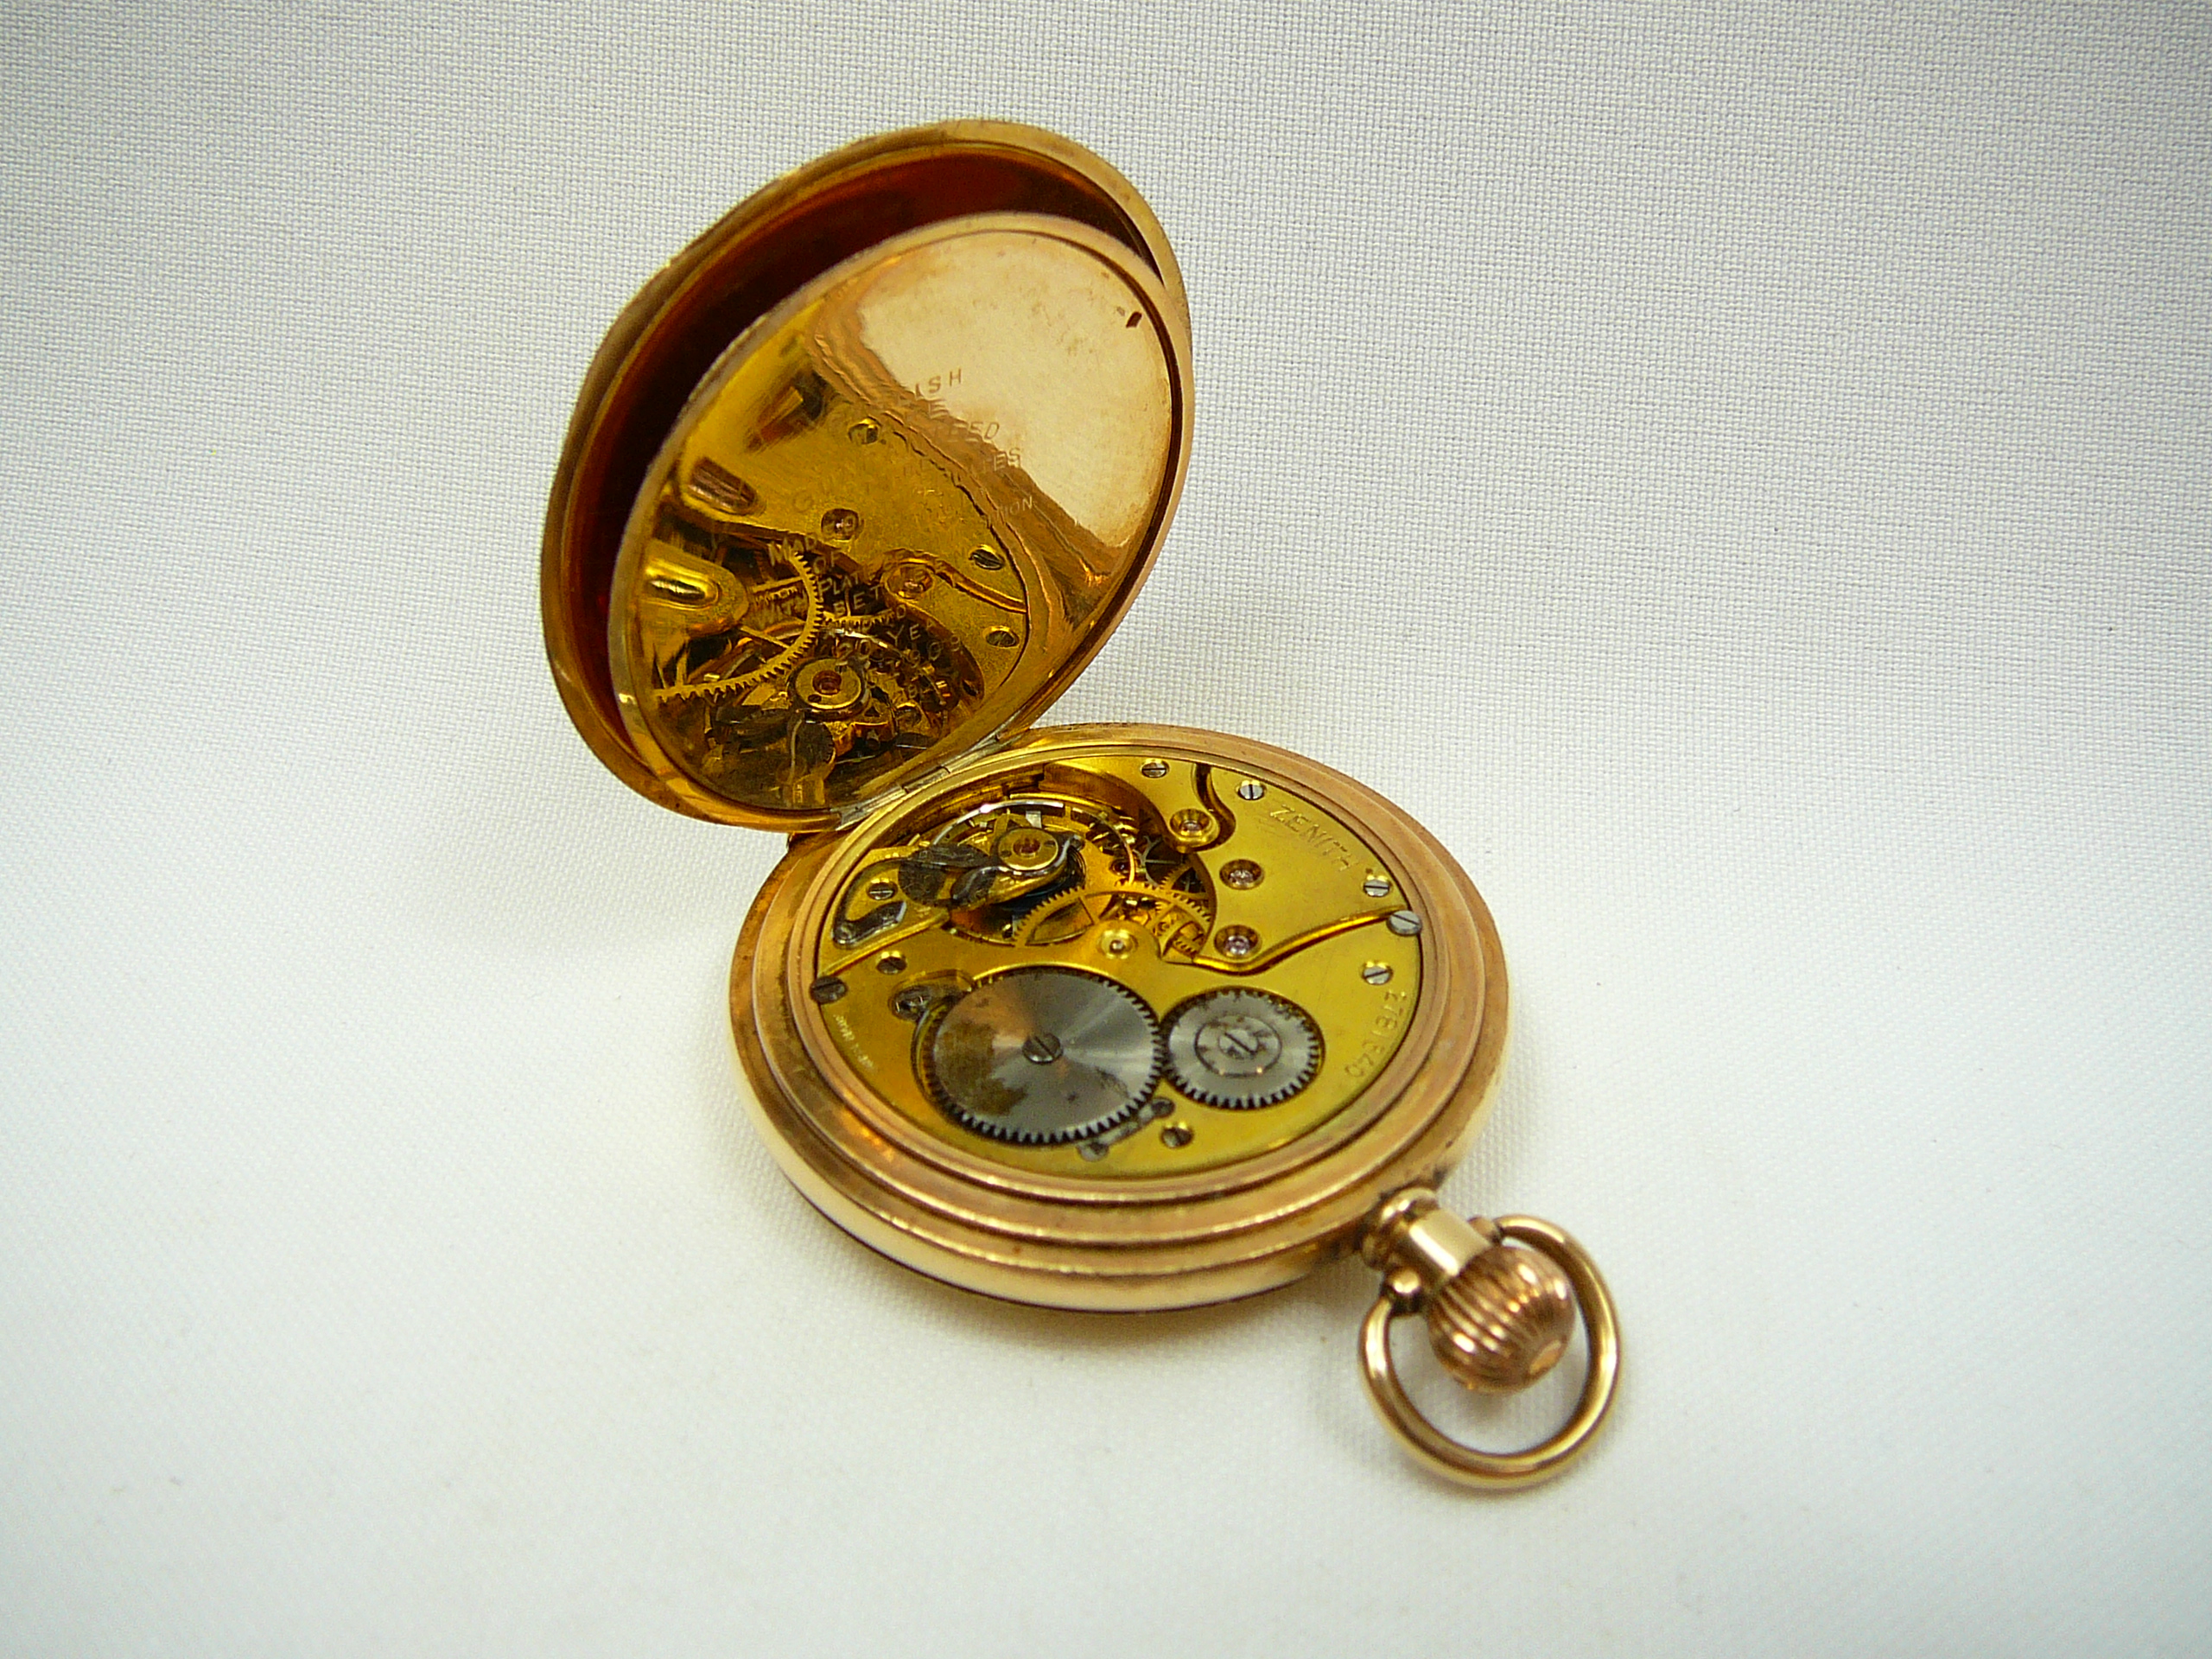 Gents Antique Pocket Watch by Zenith - Image 5 of 6